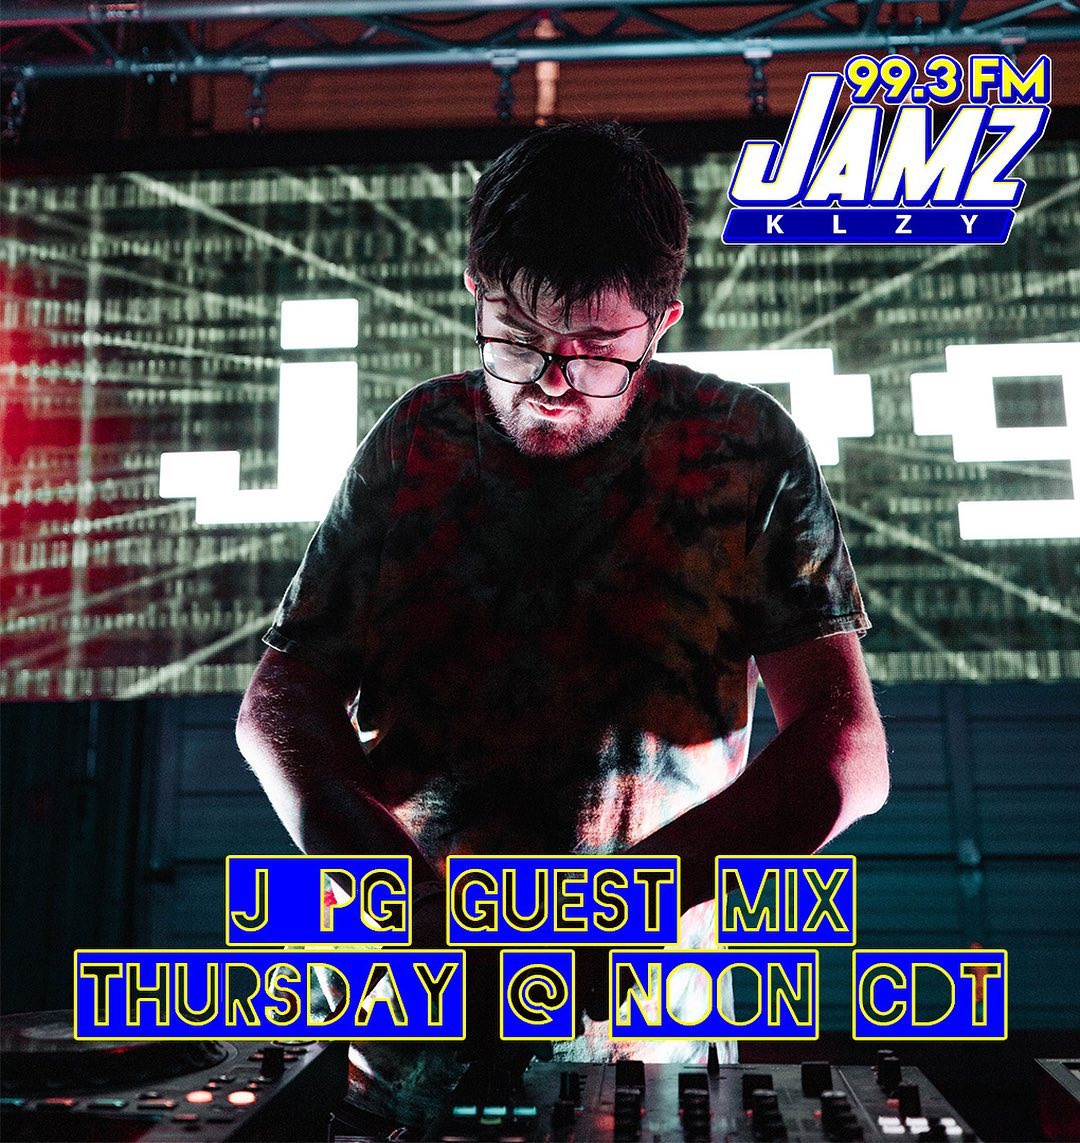 This week on the Midday Melodic Mix I’m featuring @jpg.techno on the decks and he’s bringing a full hour of techno! Tune in 99.3 on your FM dial or stream worldwide at jamz993fm.com this THURSDAY at noon central! #salinaks #centralks #techno #technolovers #6740wonderful #salinadowntown